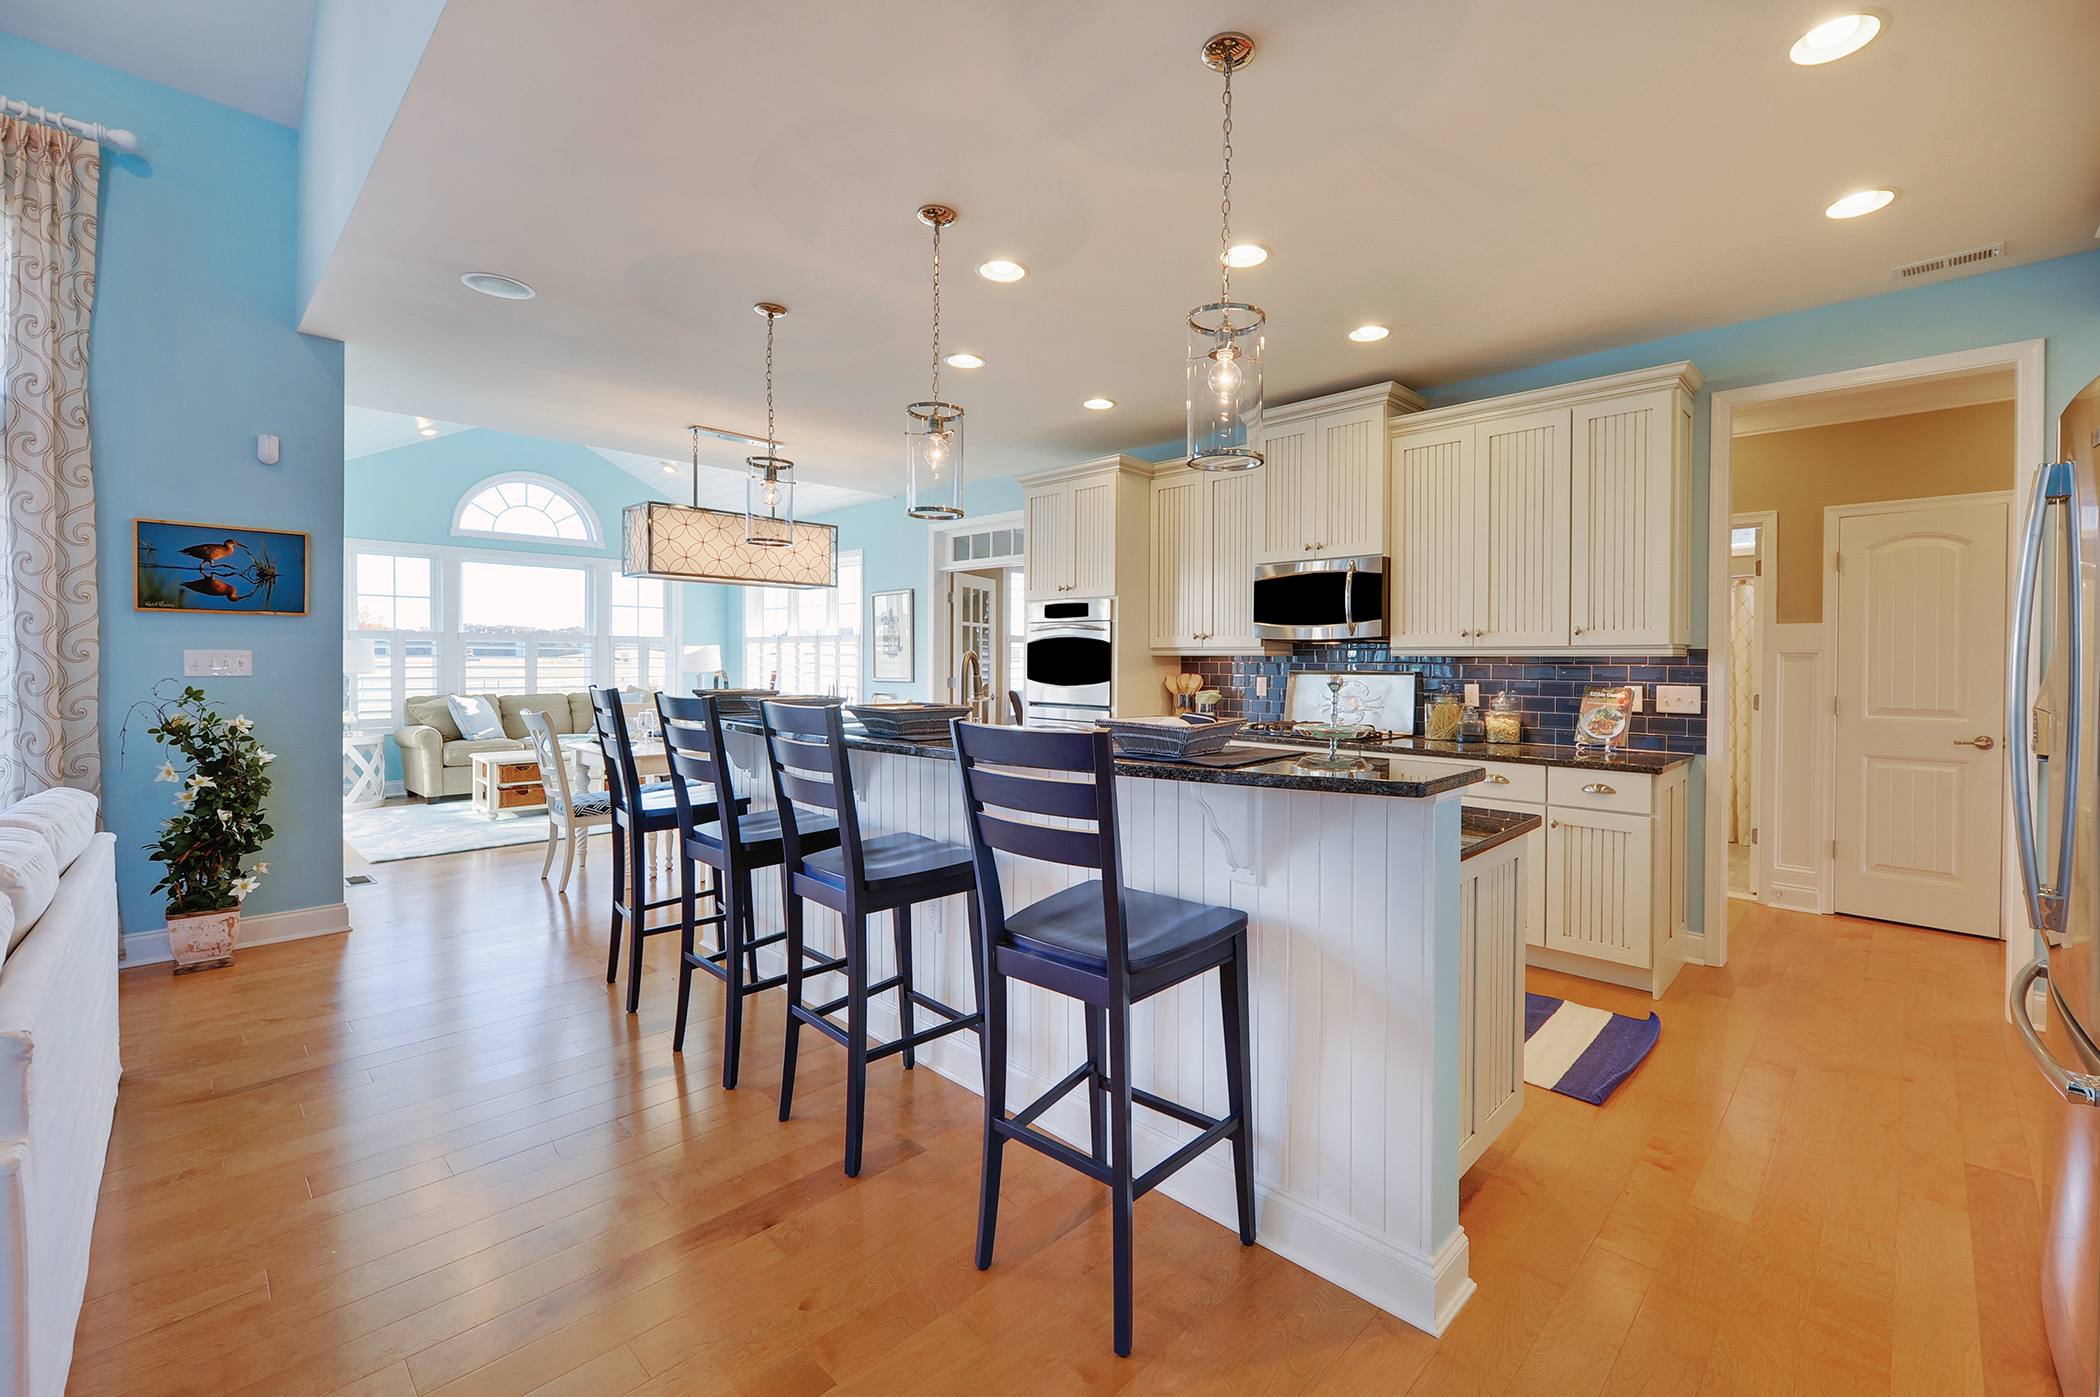 The combination of the bead board panel from the cabinets and wall paint color gives this casual kitchen a coastal feel. This casual design makes for a comfortable environment. 